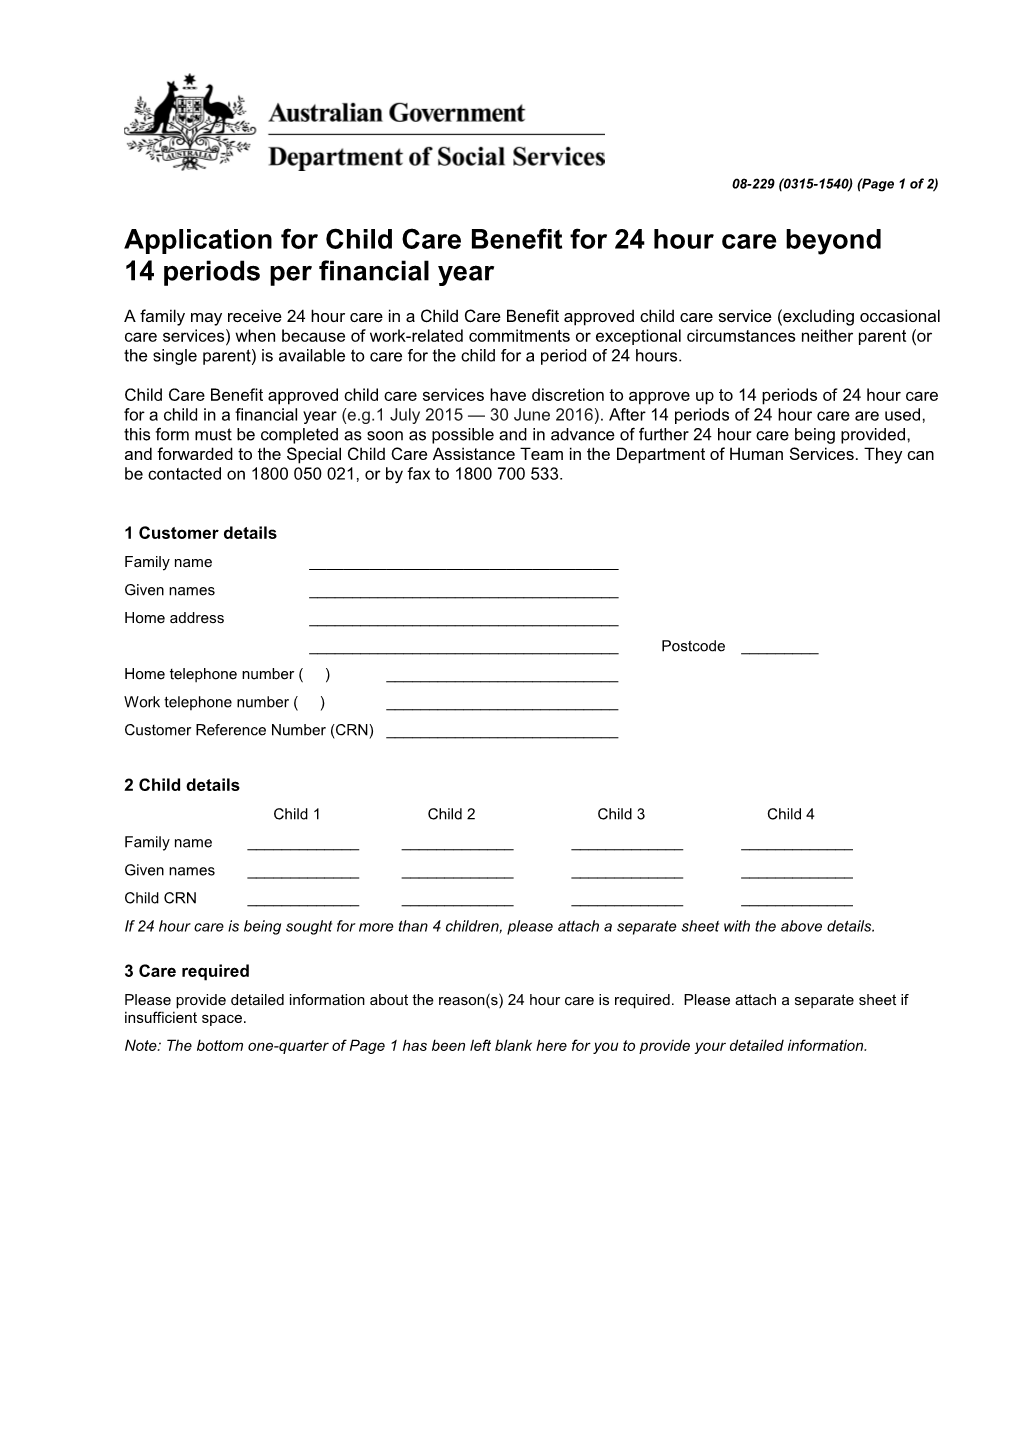 Application for Child Care Benefitfor 24 Hour Care Beyond 14 Periods Per Financial Year